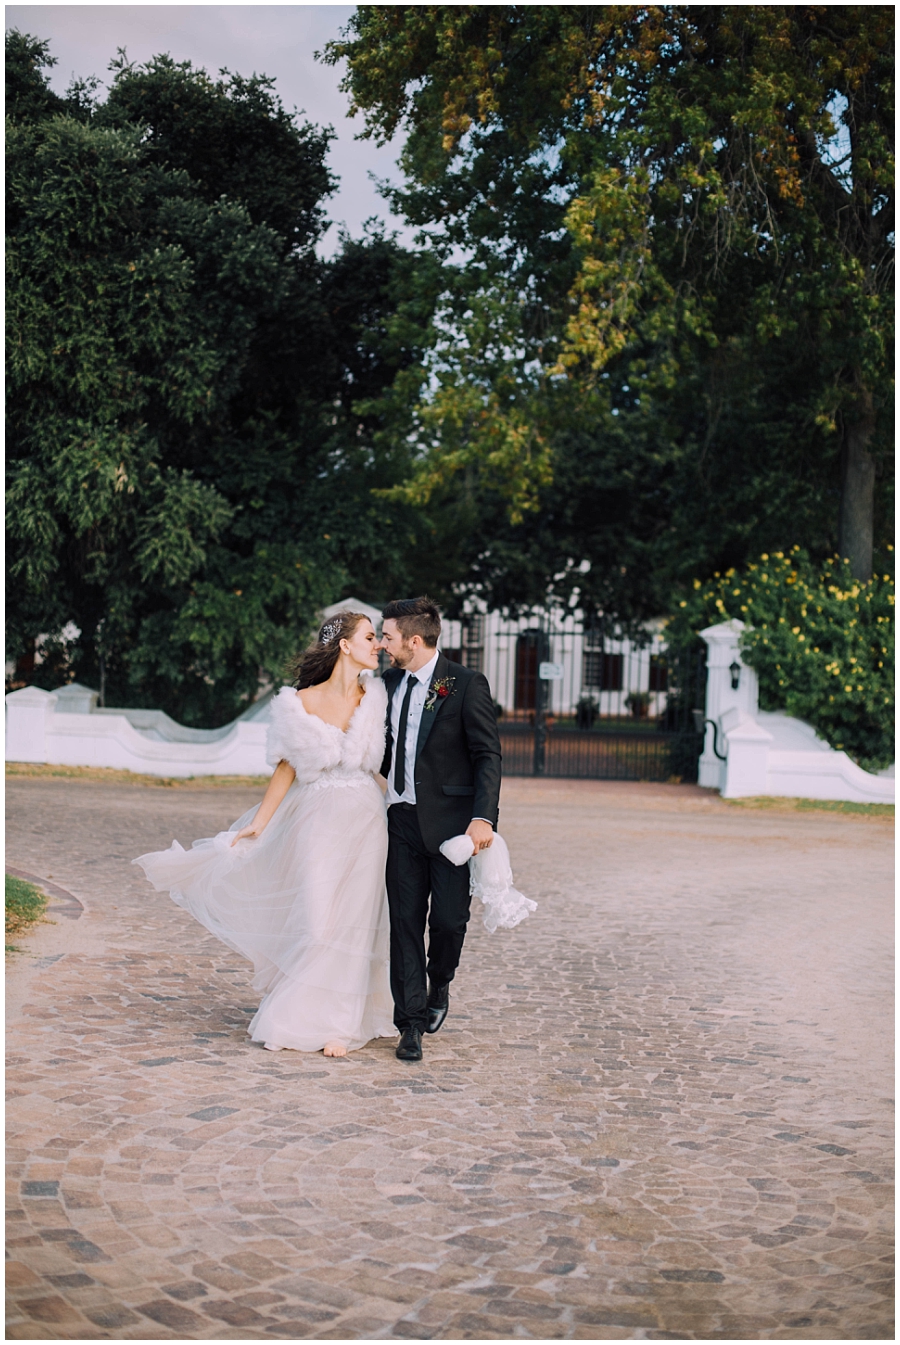 Ronel Kruger Cape Town Wedding and Lifestyle Photographer_6582.jpg